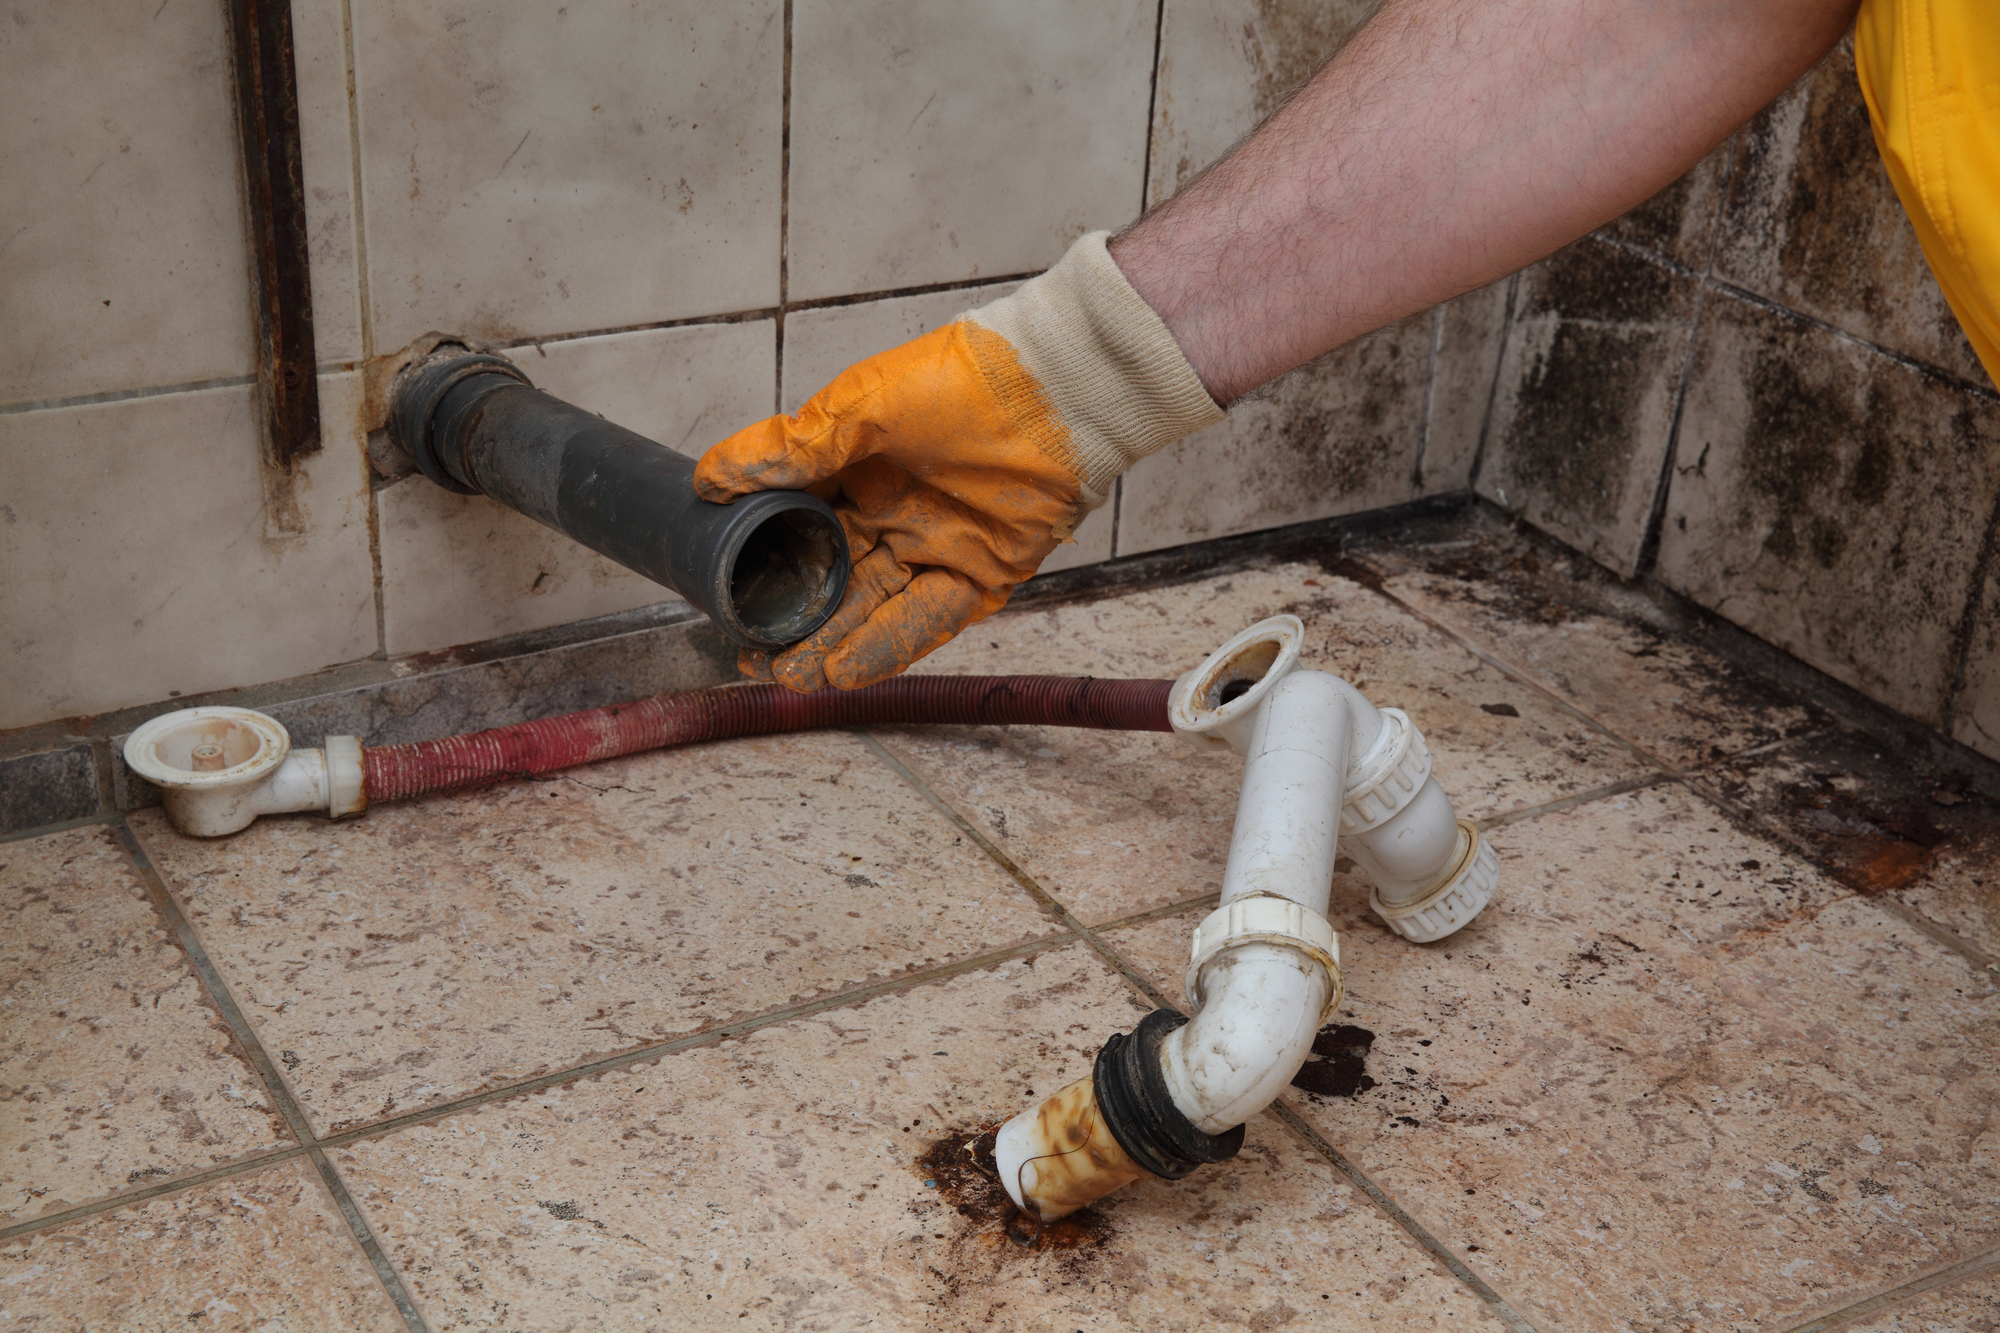 Common Plumbing Problems and How to Prevent Them